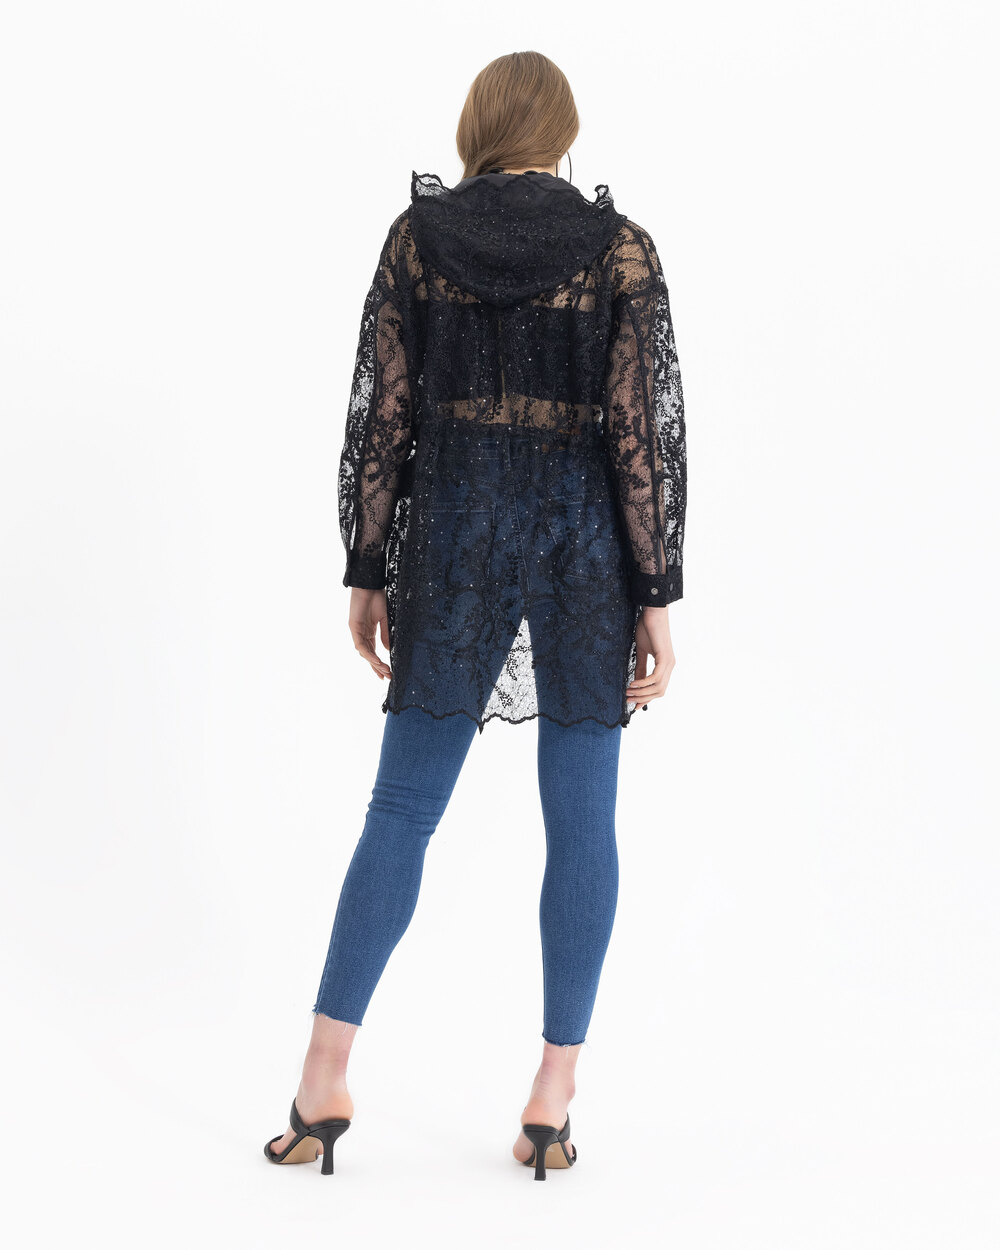 Zippered Sequin Detailed Lace Jacket